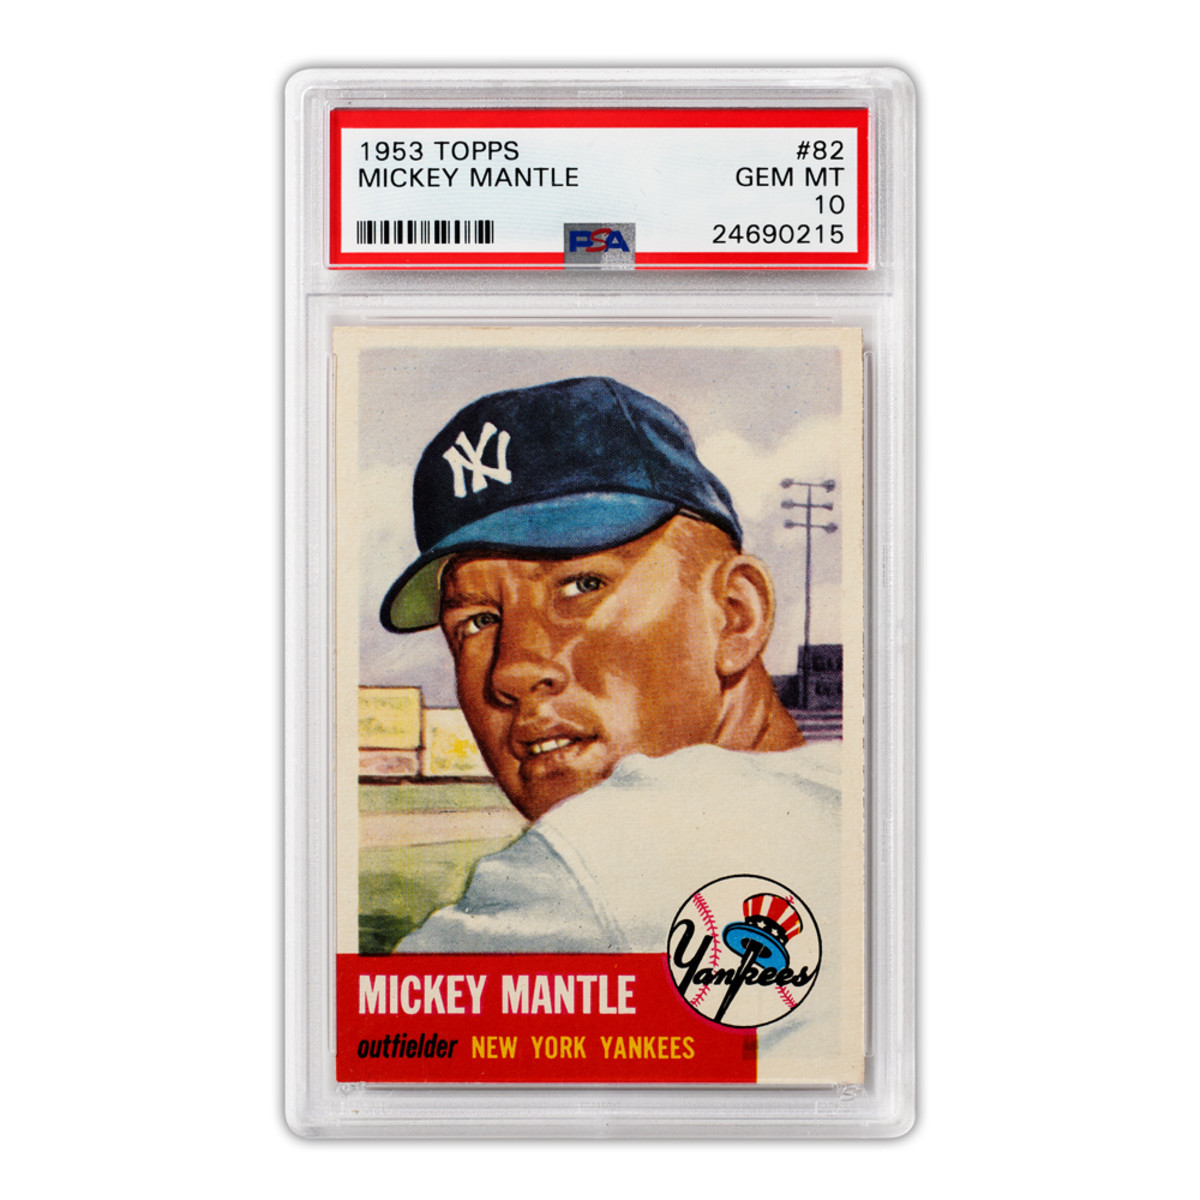 Big bucks: You won't believe how much this Mickey Mantle baseball card sold  for 